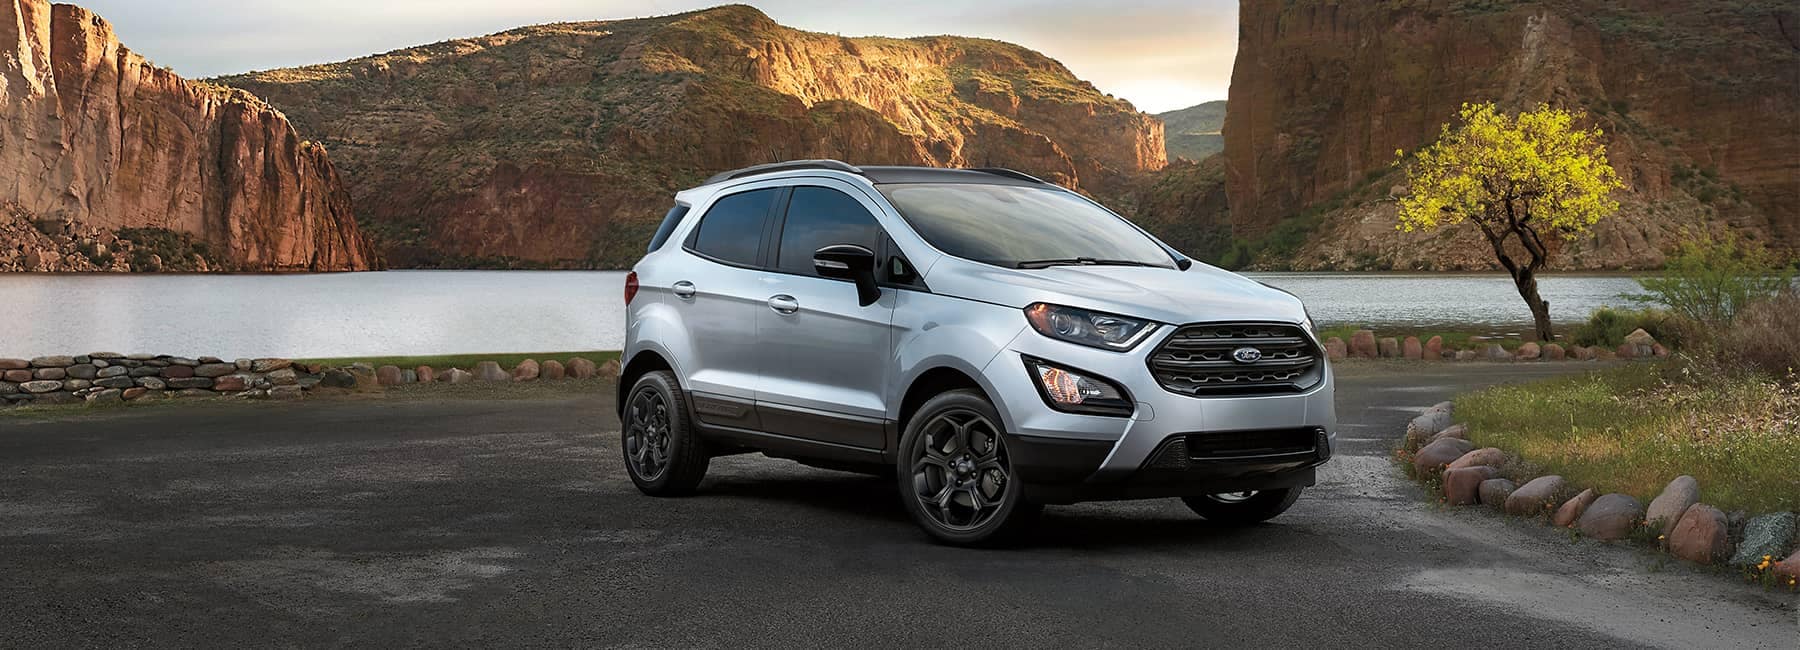 Silver 2021 Ford EcoSport parked on a river overlook in a canyon